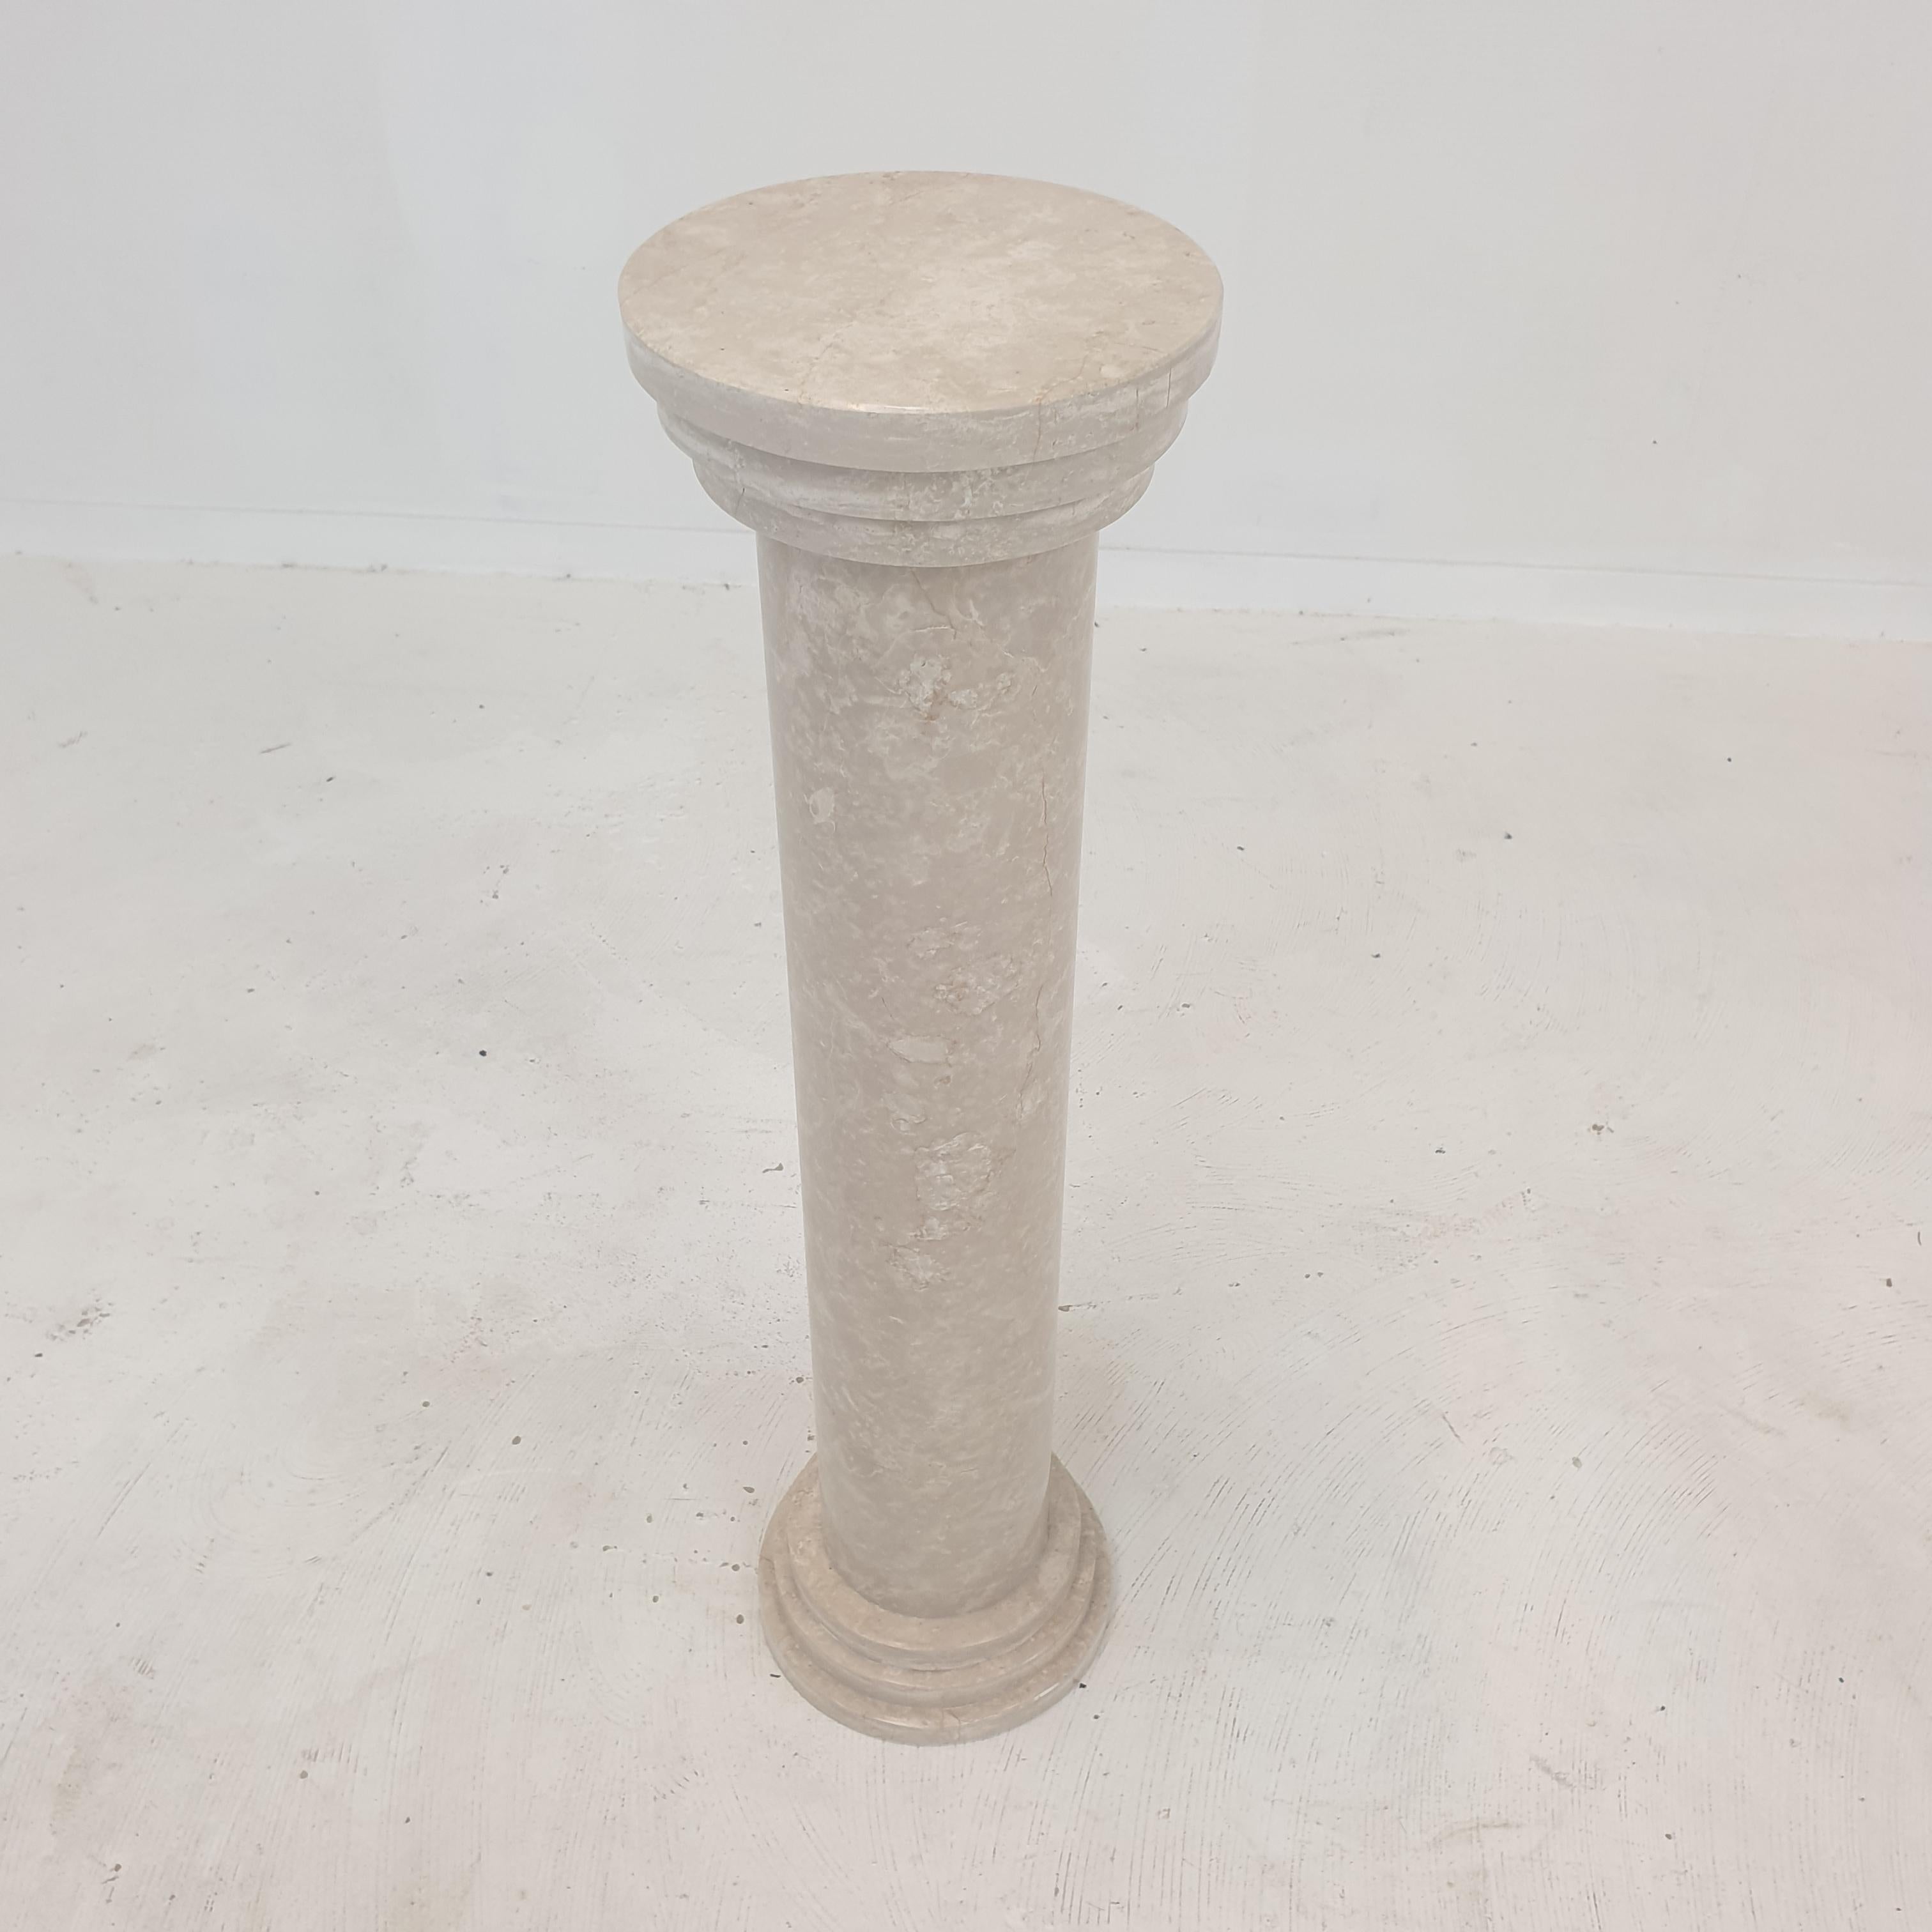 Italian Travertine Side Table or Pedestal, 1980s For Sale 6